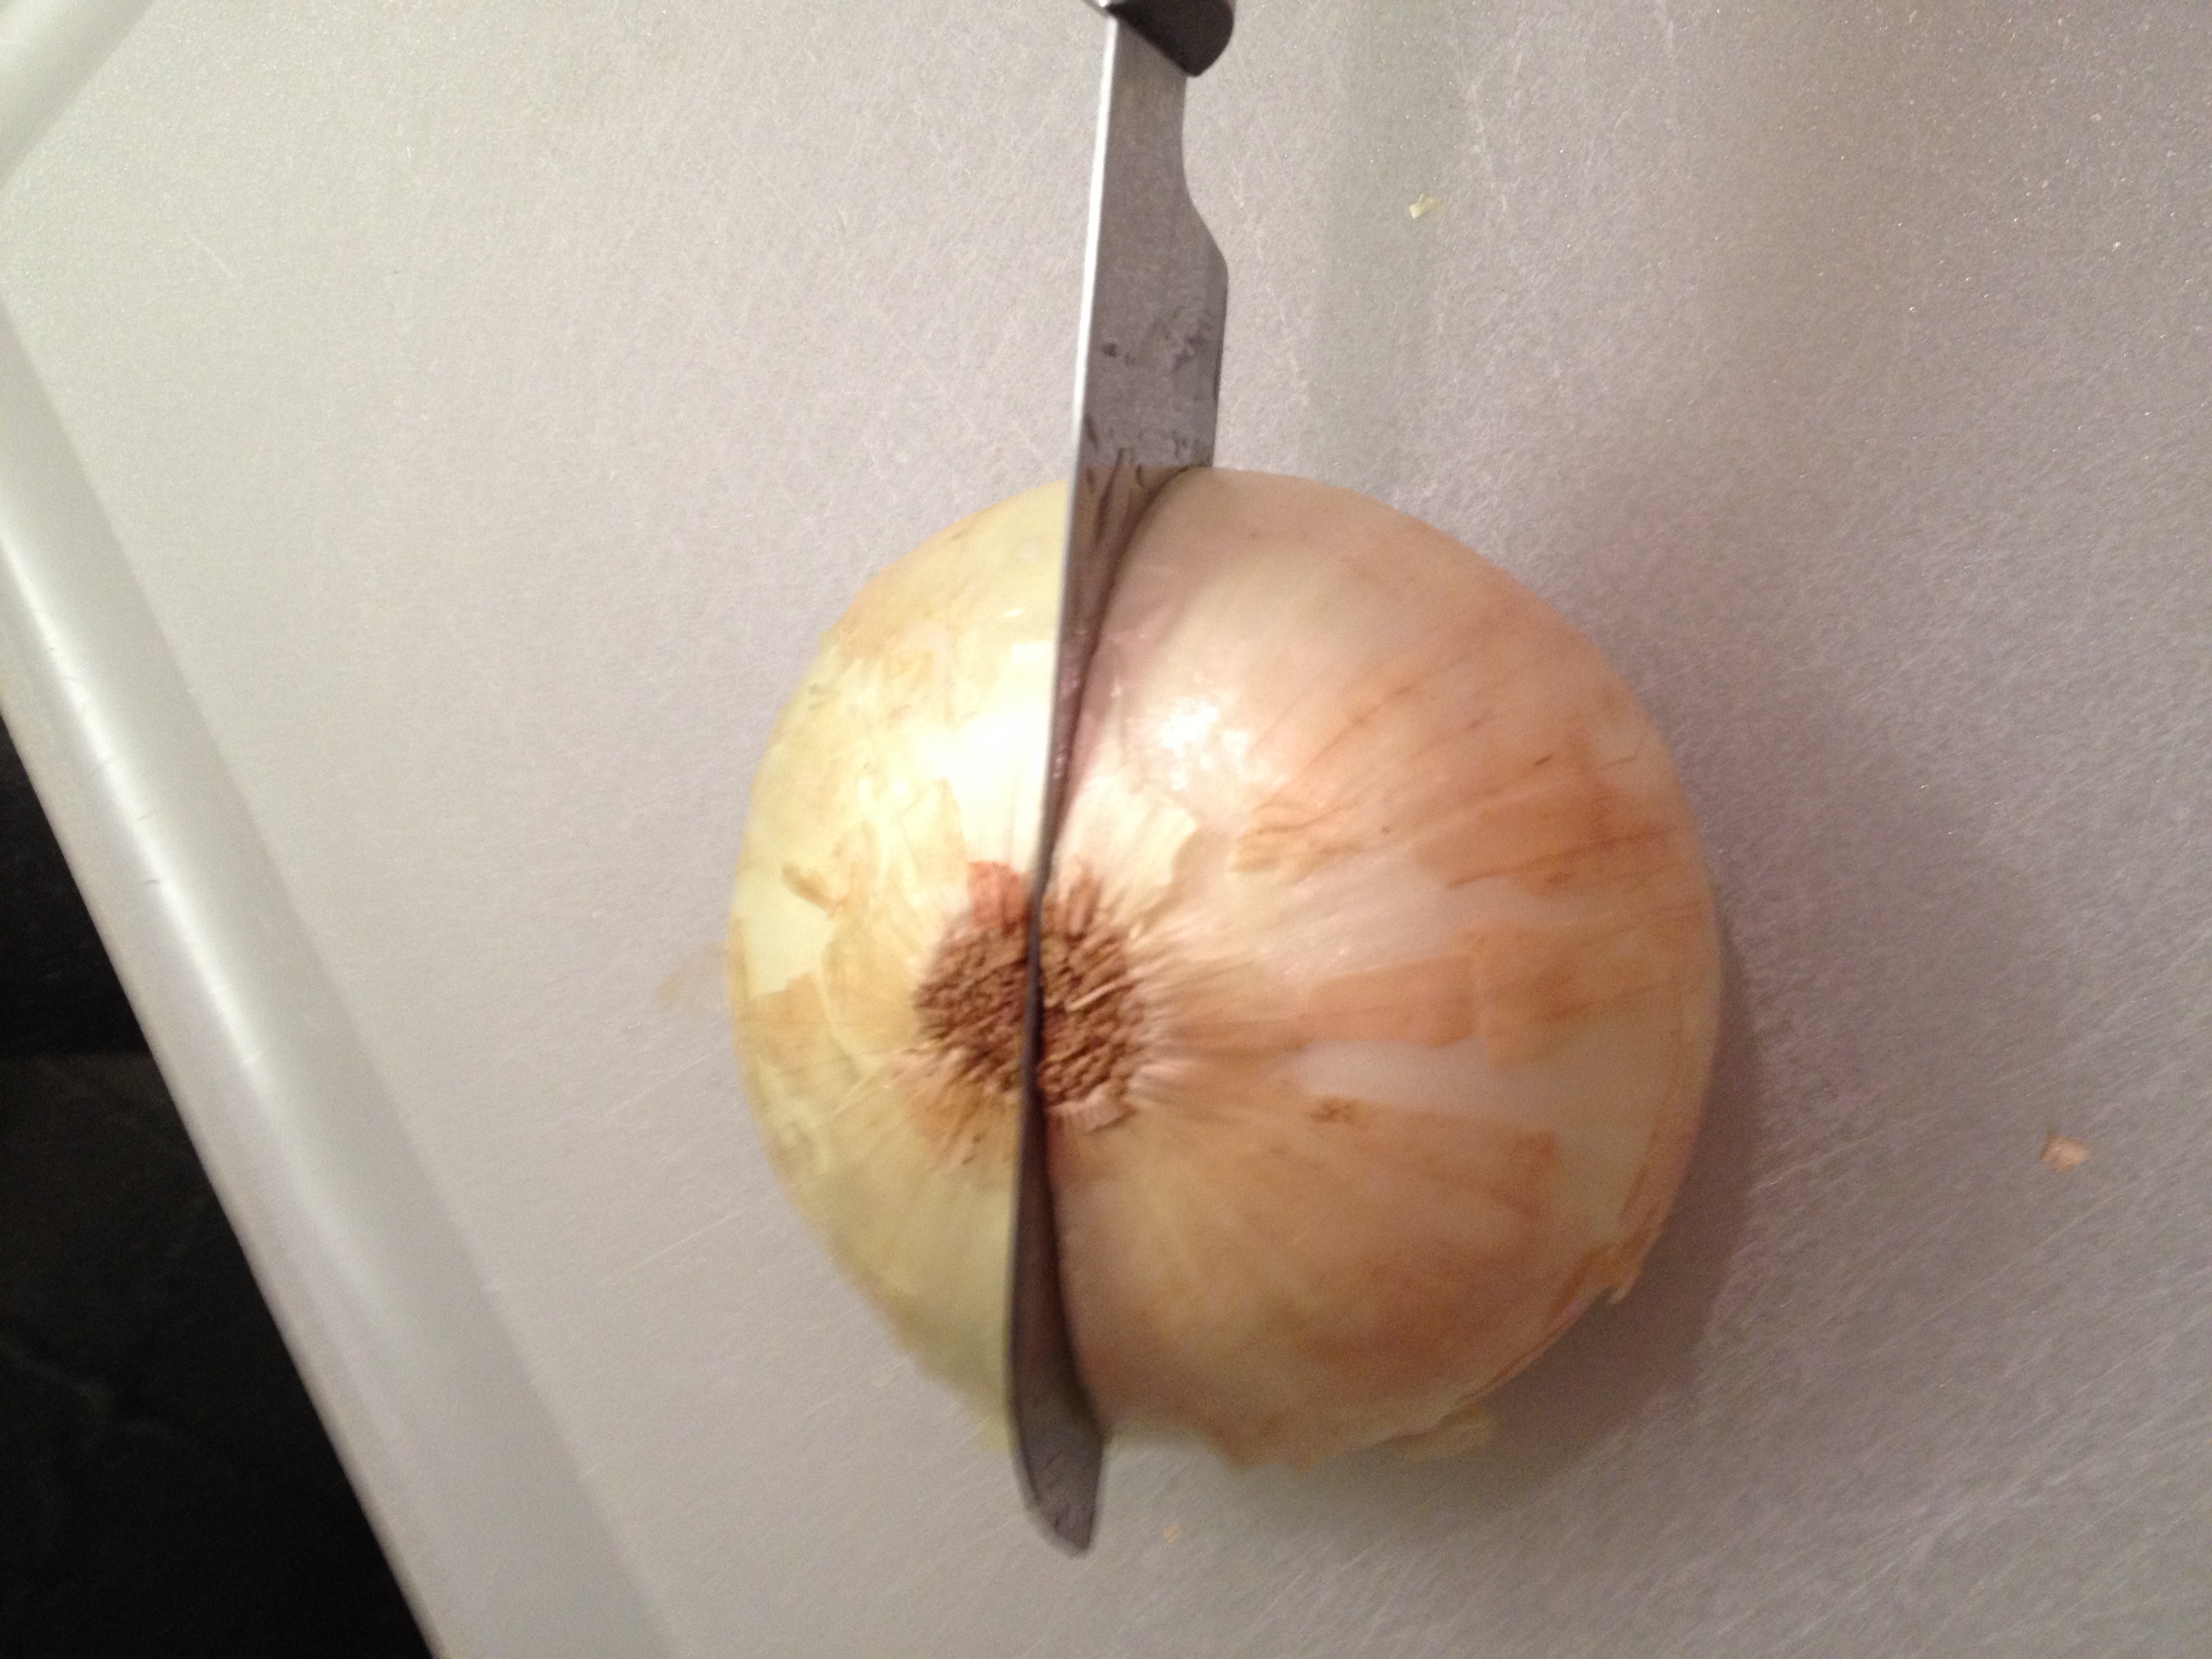 Step 2:  Place the onion flat side down and cut in half.  I like to think of this end as the end looking like hair.  One end the Blossom, One end the Hair.